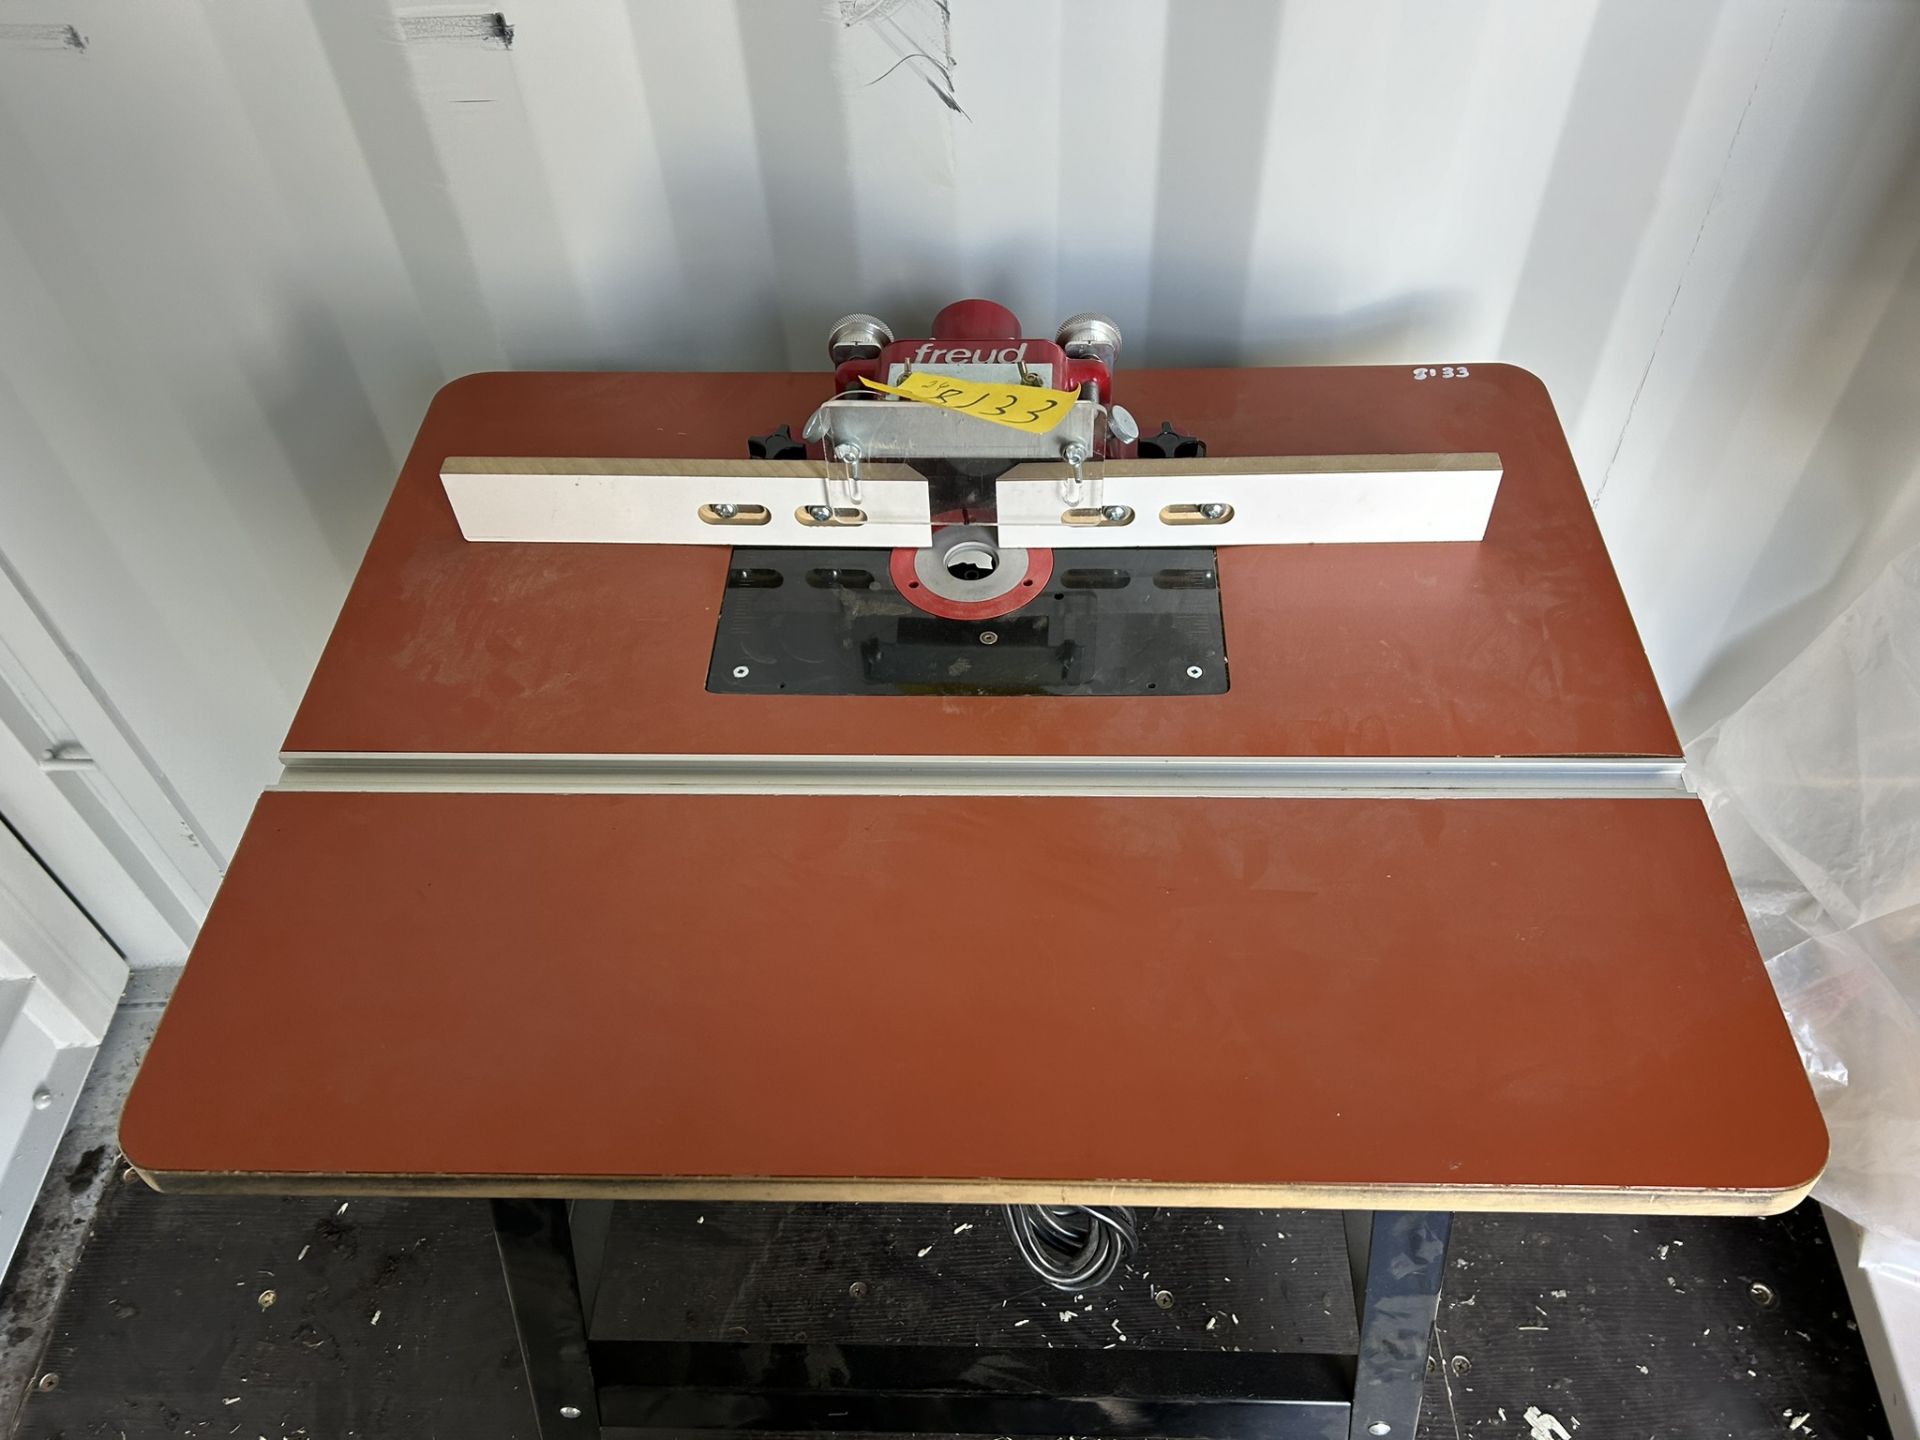 FREUD ROUTER TABLE W/SEARS ROUTER - Image 2 of 7